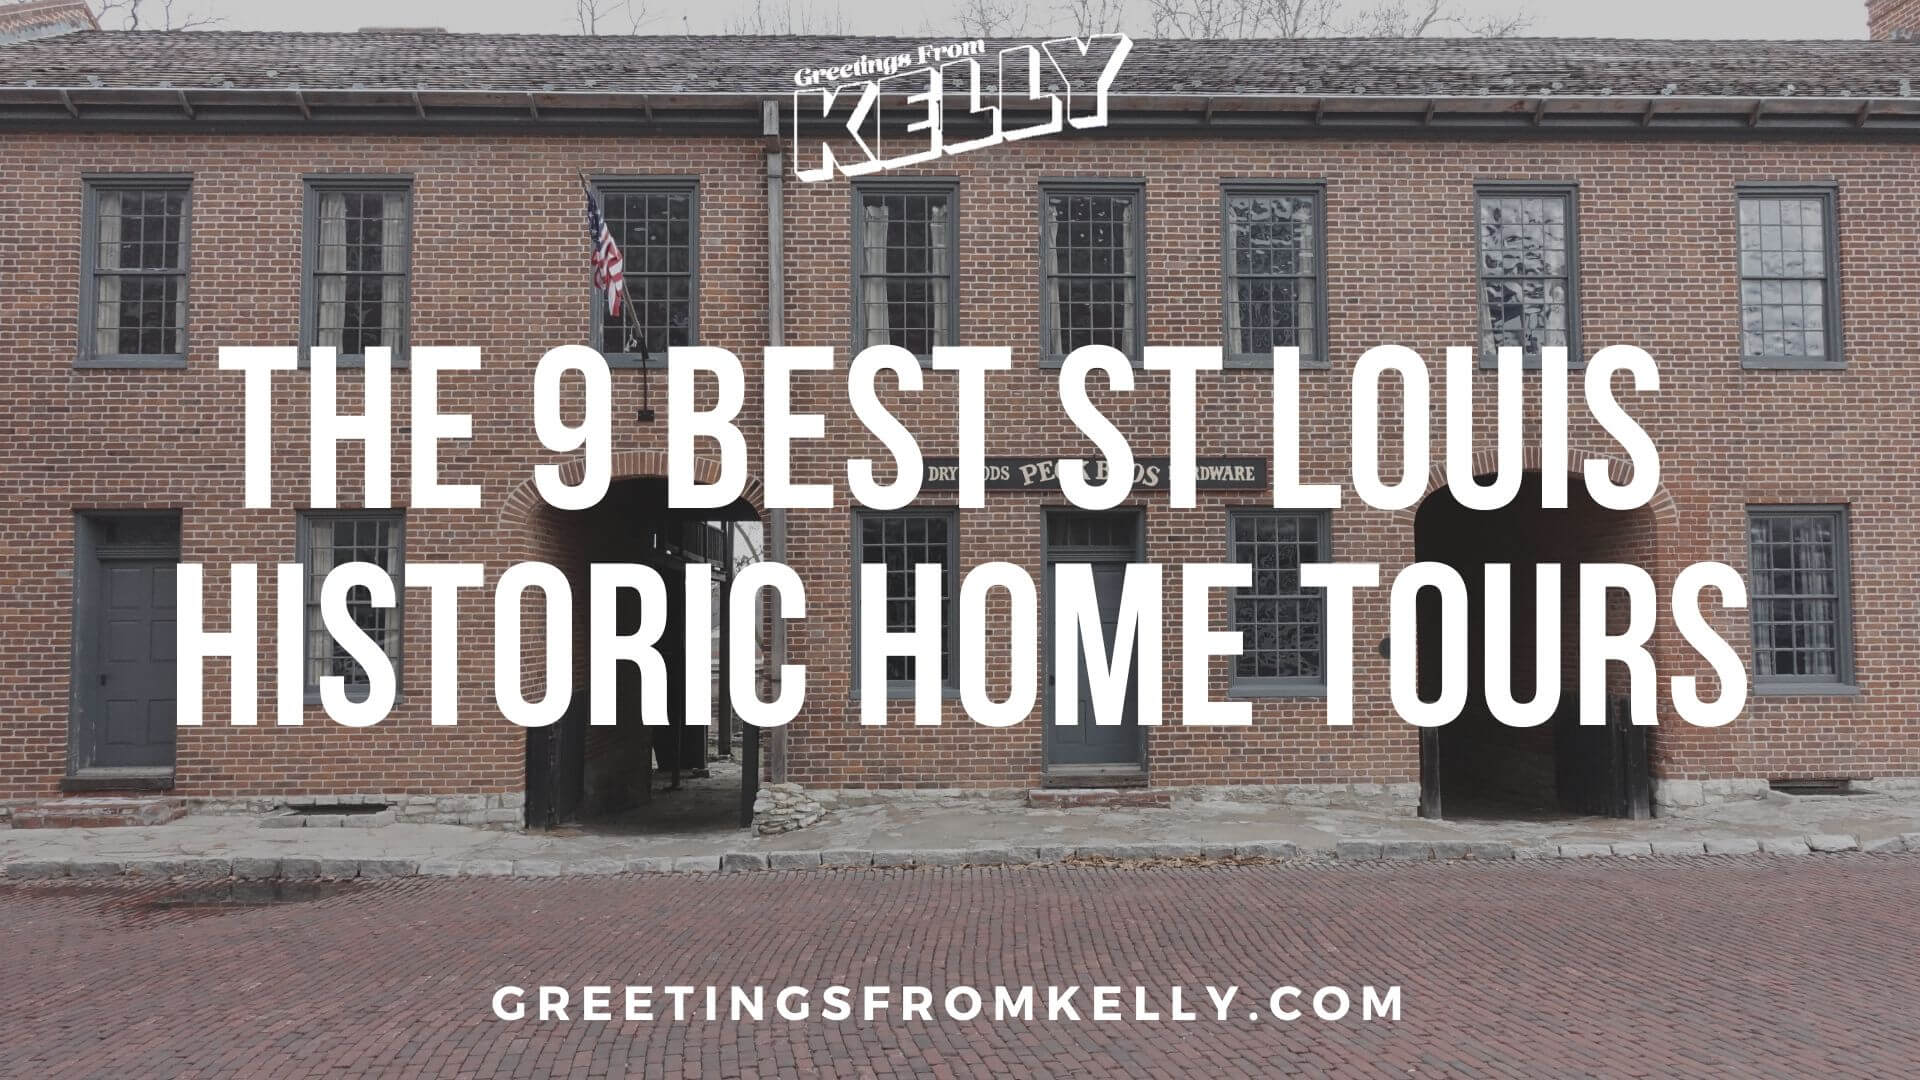 8 historic house tours in St. Louis